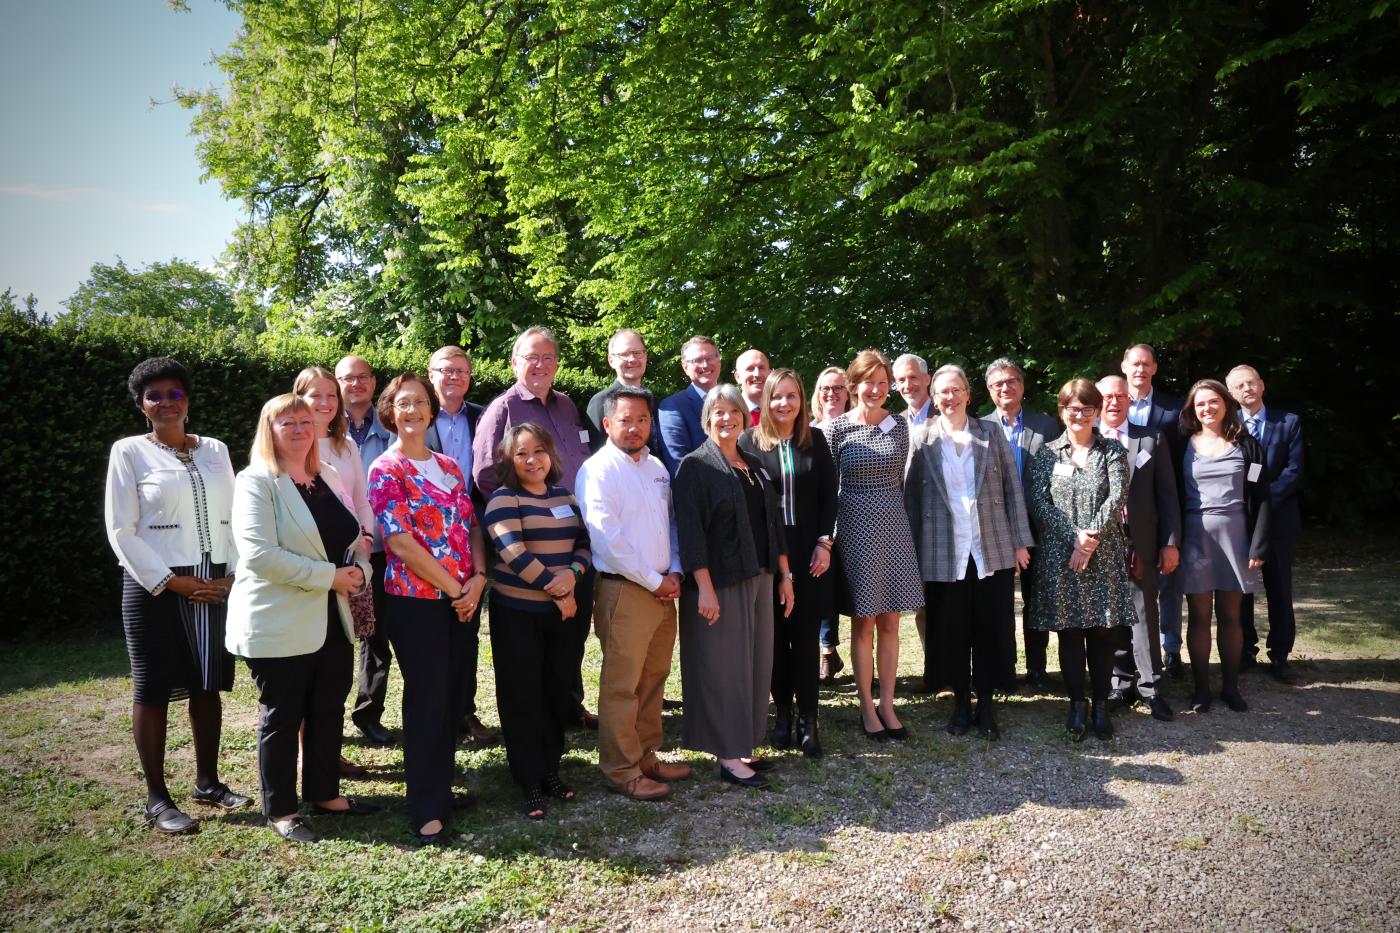 Participants of the "Working together" meeting in Bossey